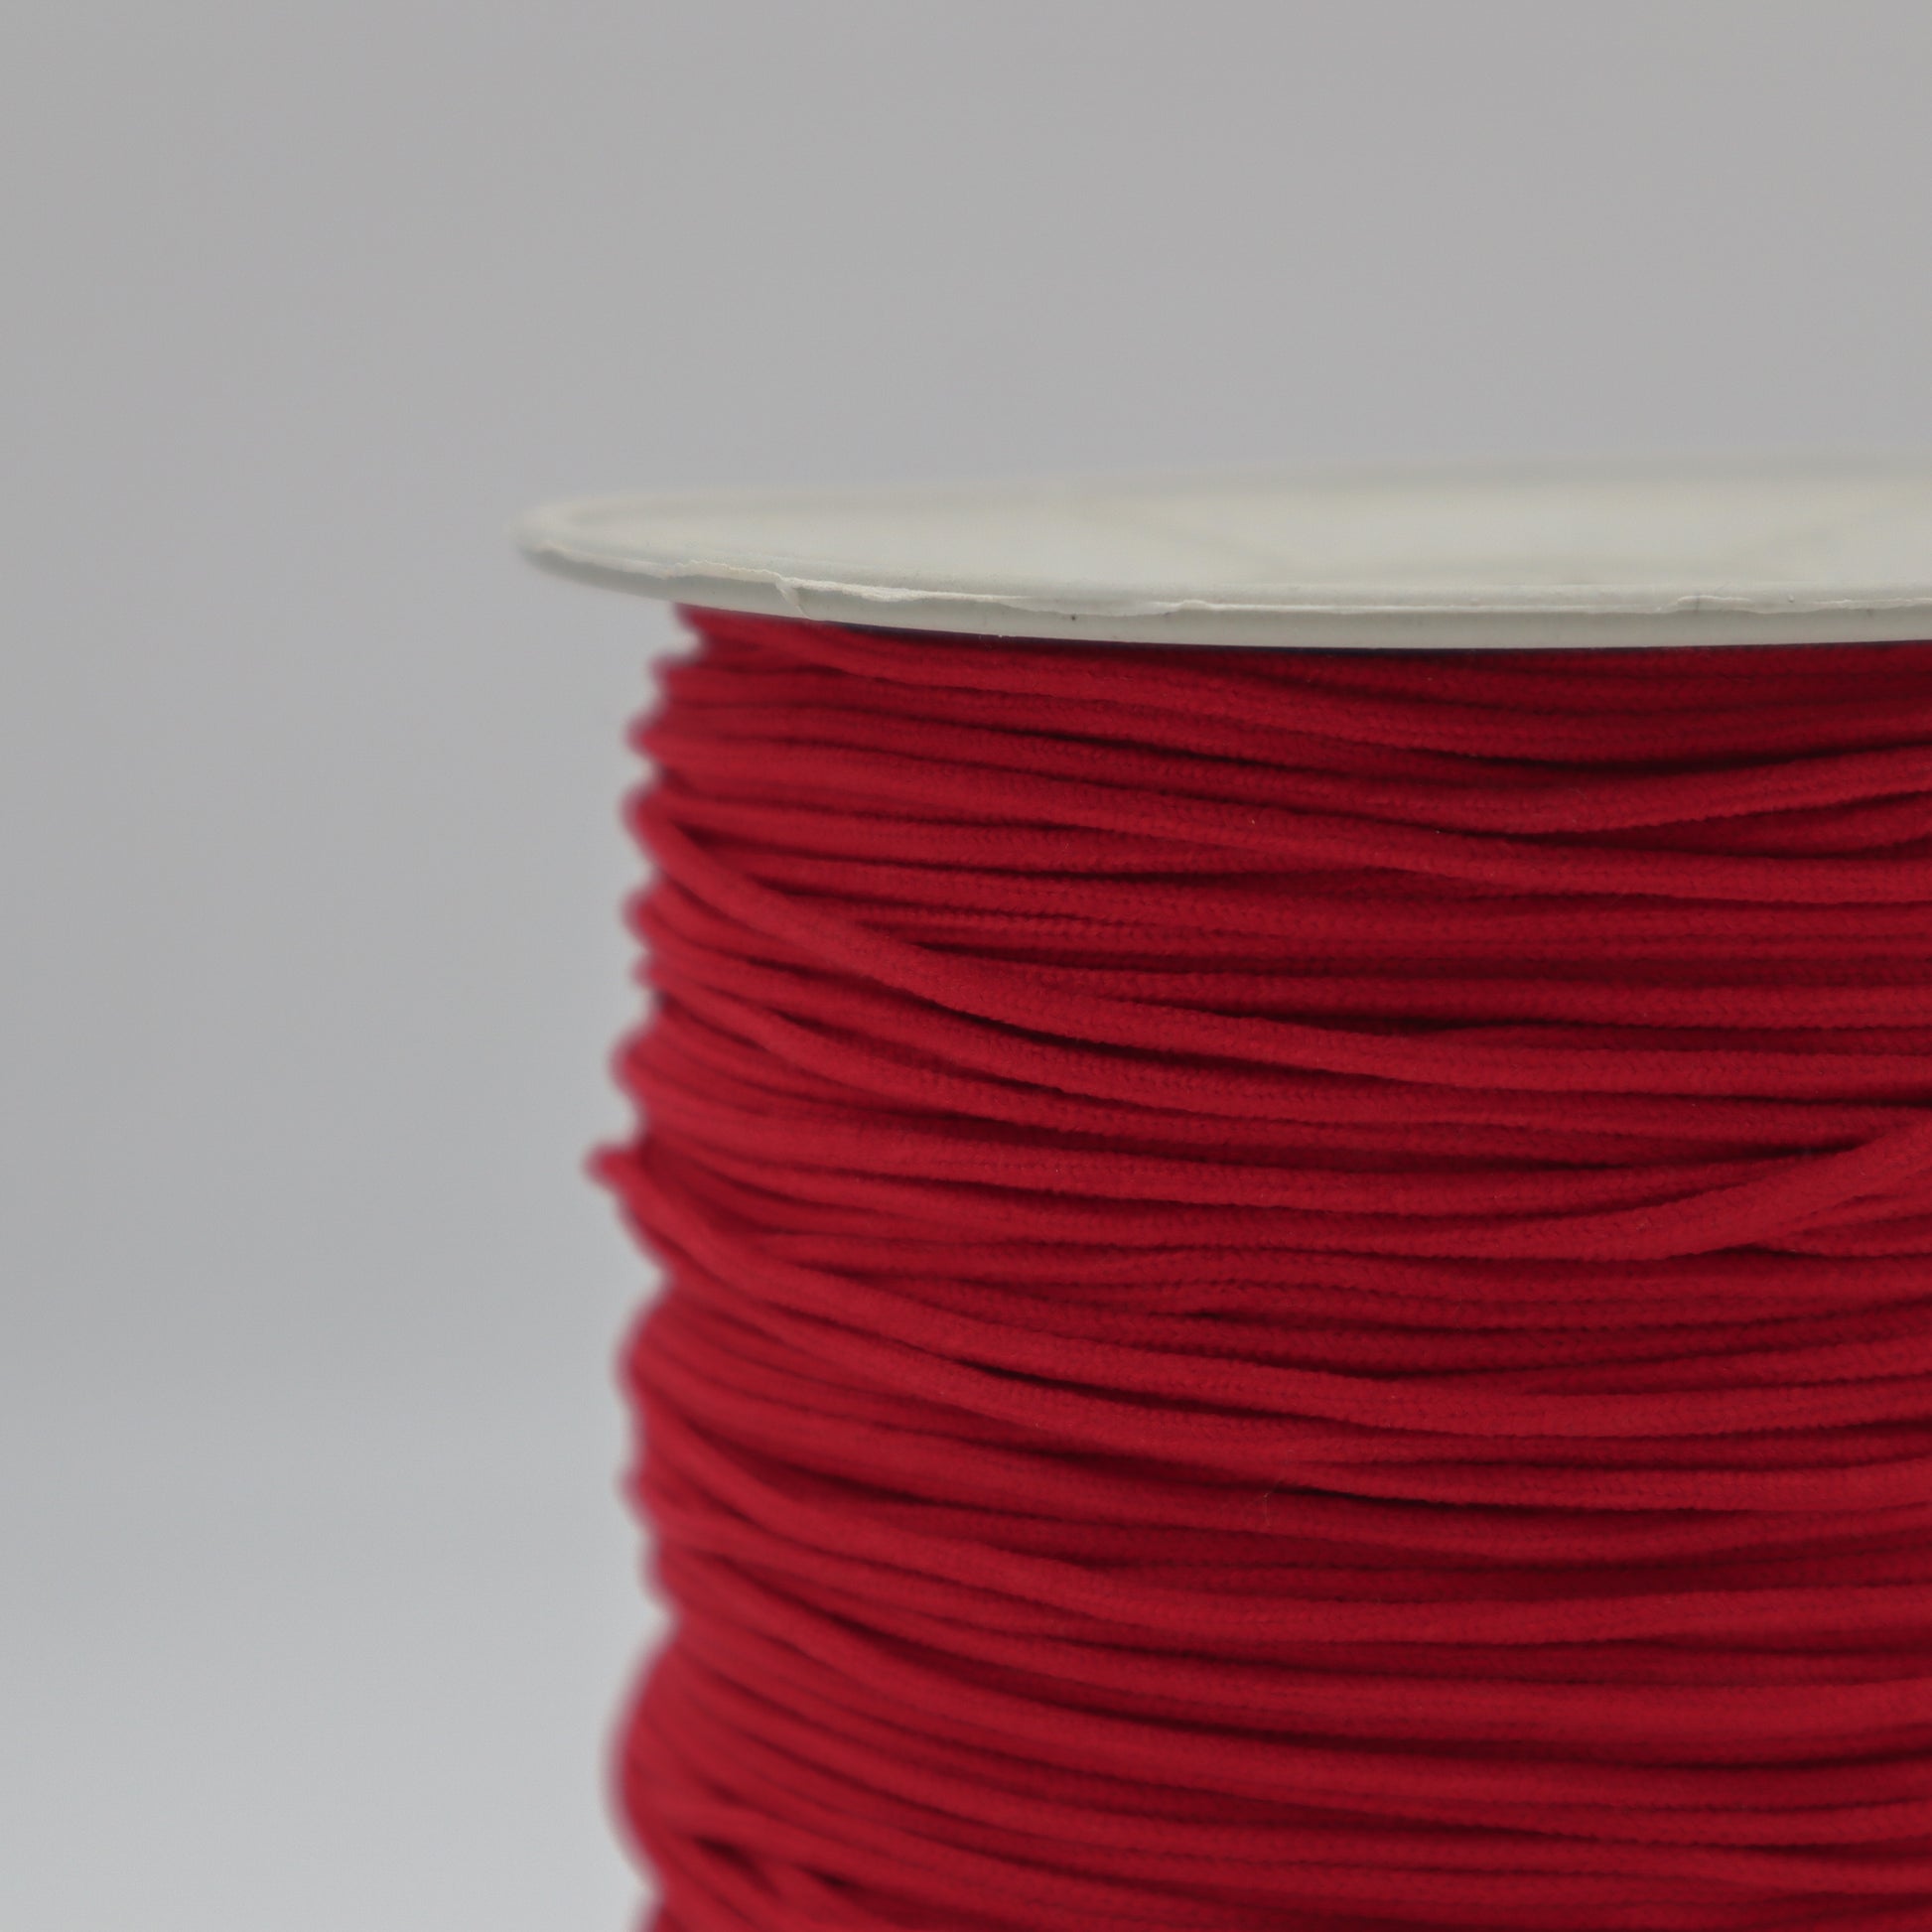 Mask Cord / Elastic String - Red